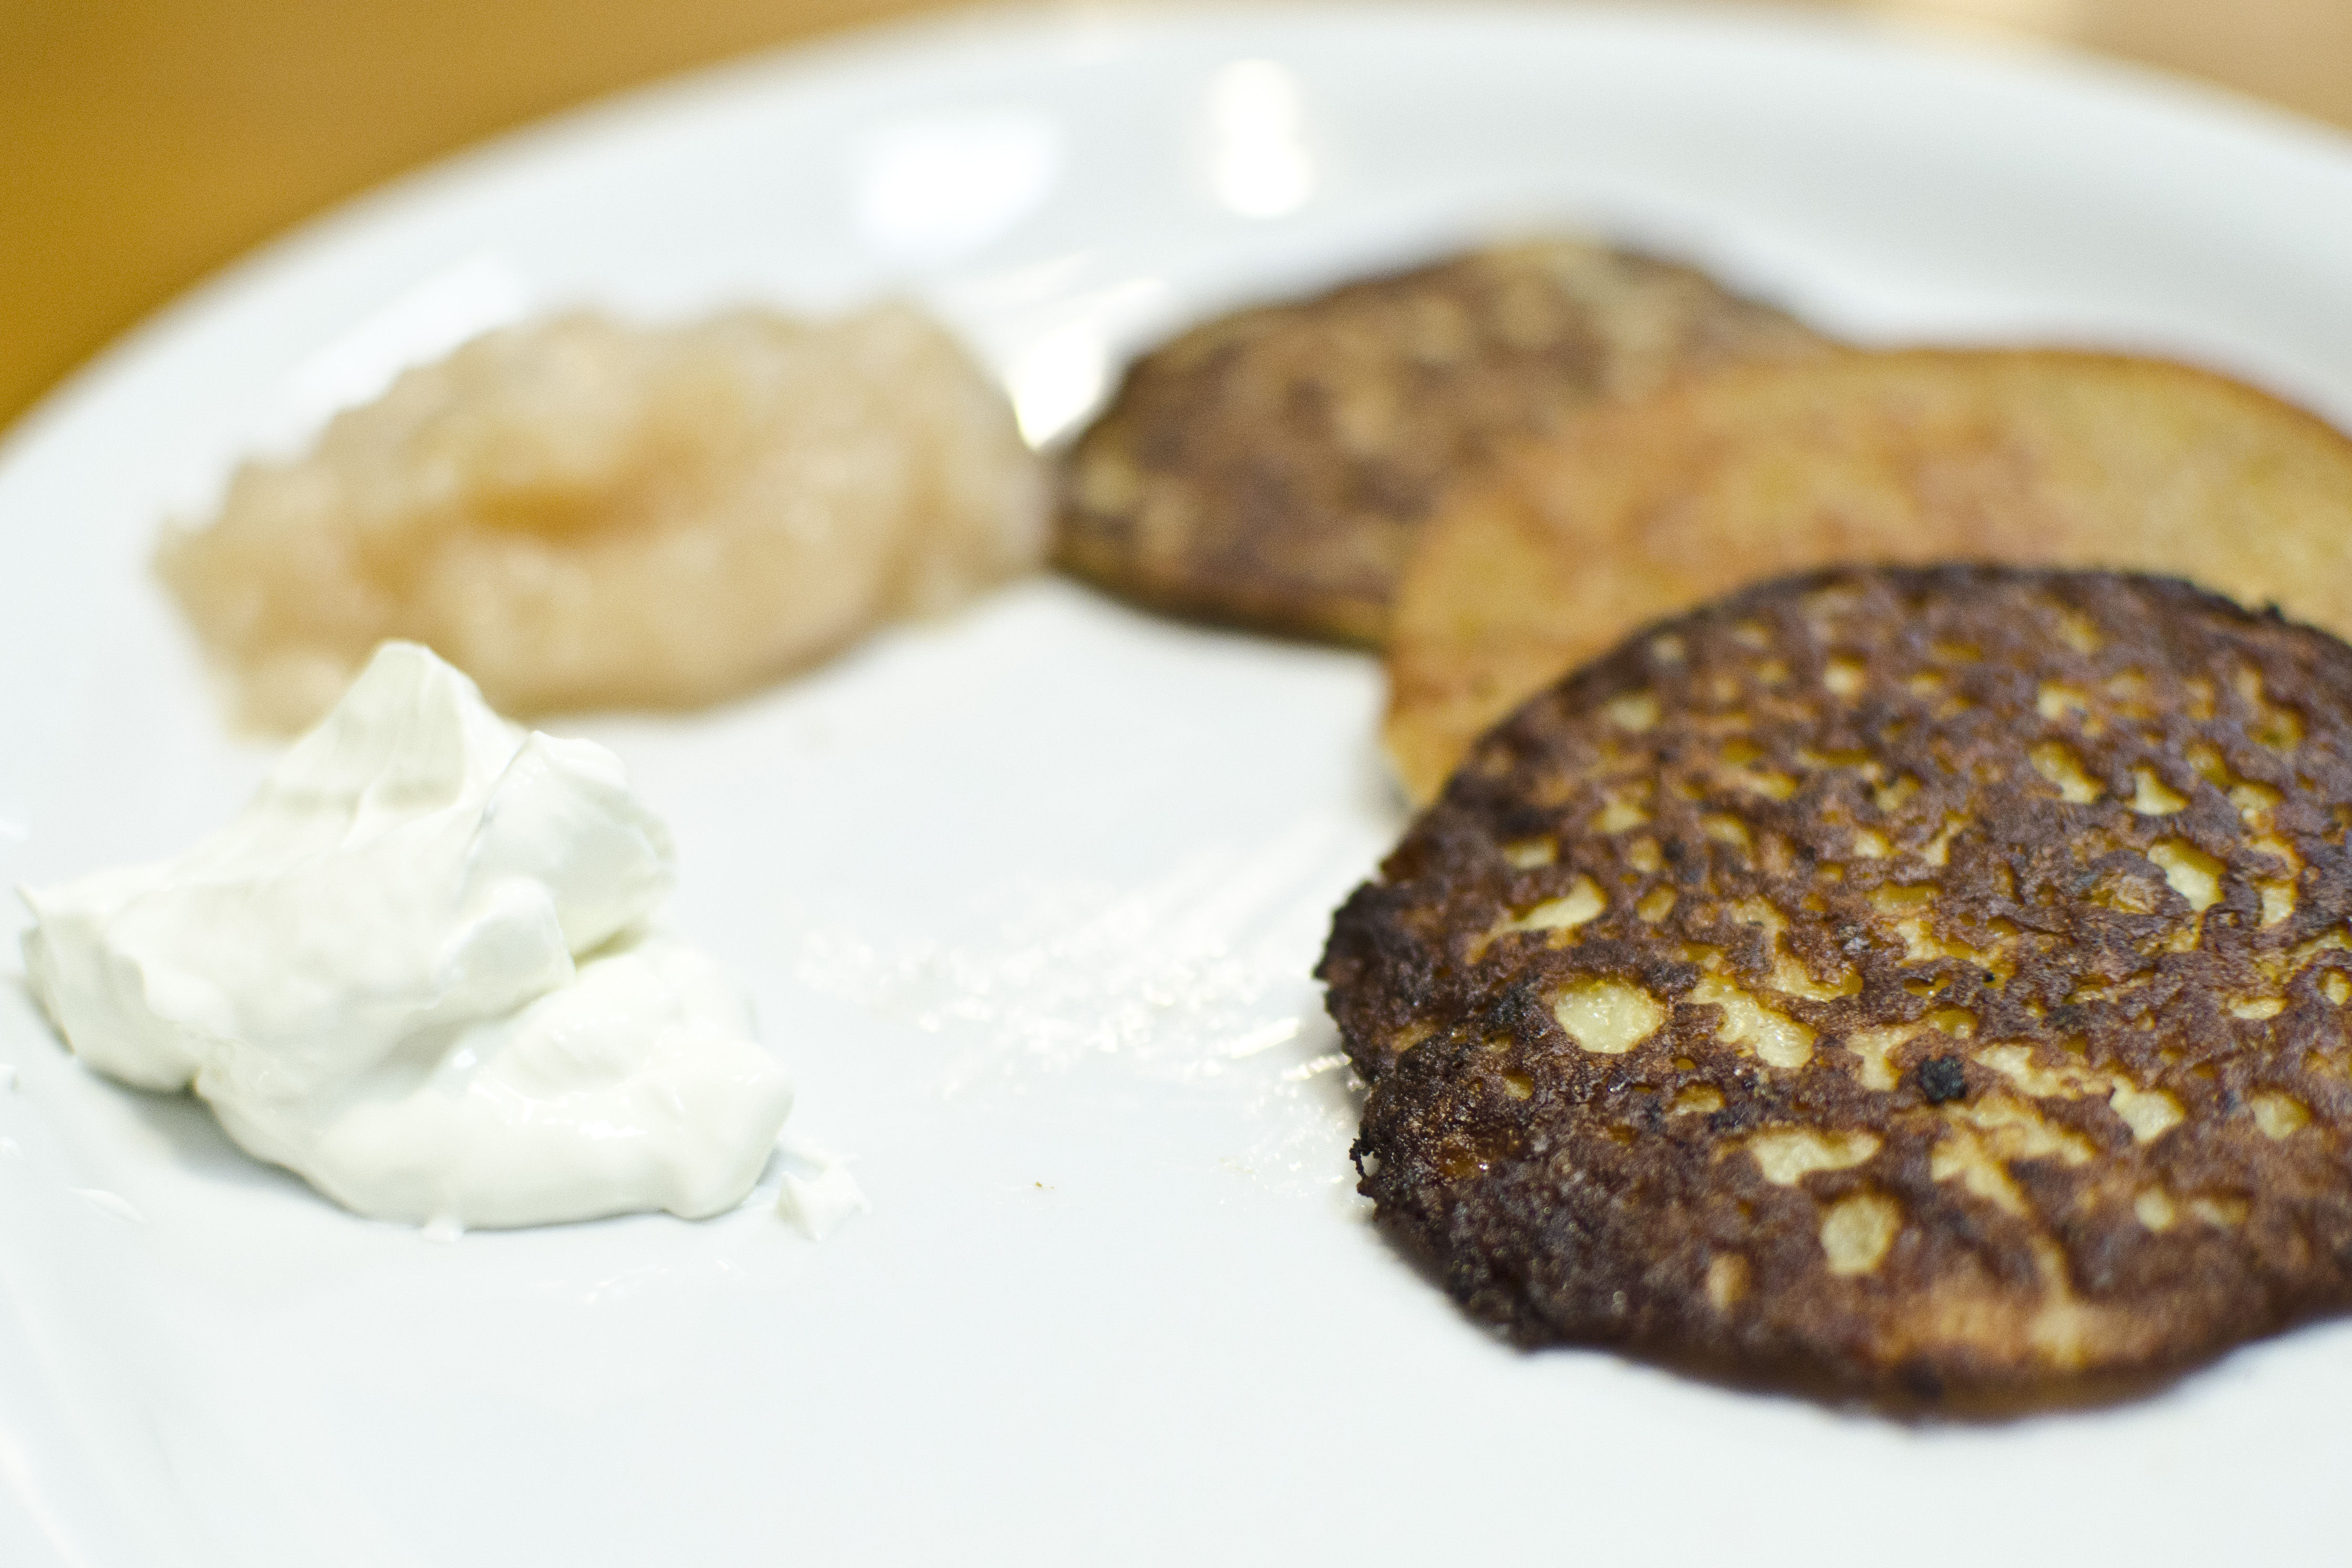 Latkes at the original Inna’s Kitchen location in Newton, now closed